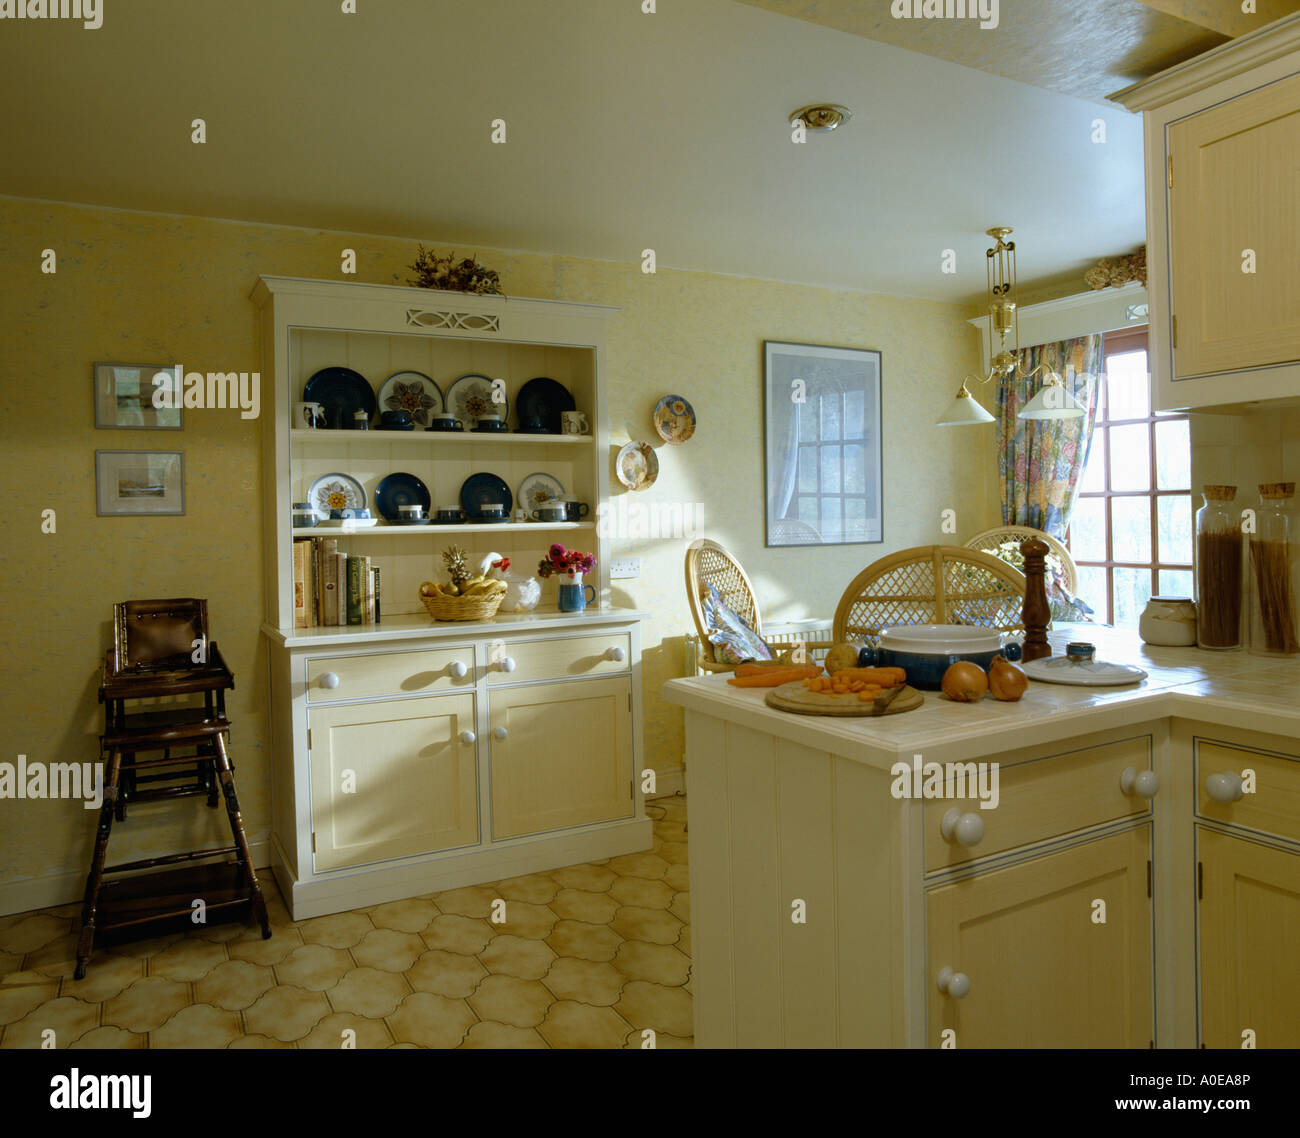 Yellow Kitchen With Painted Dresser Stock Photo 9969669 Alamy